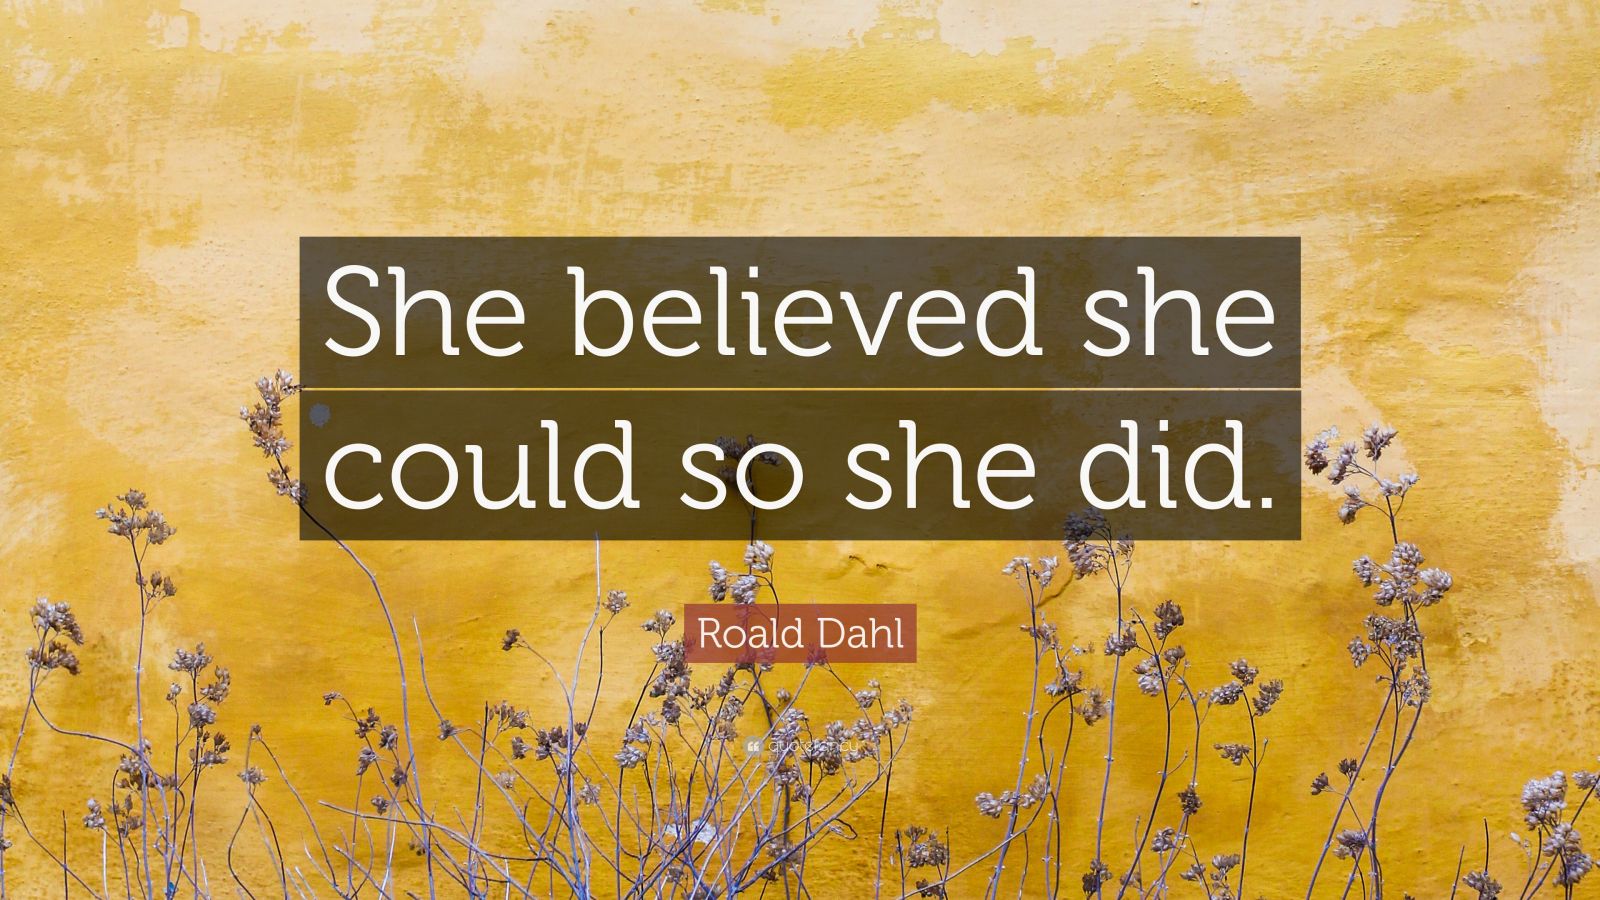 Roald Dahl Quote: “She believed she could so she did.”